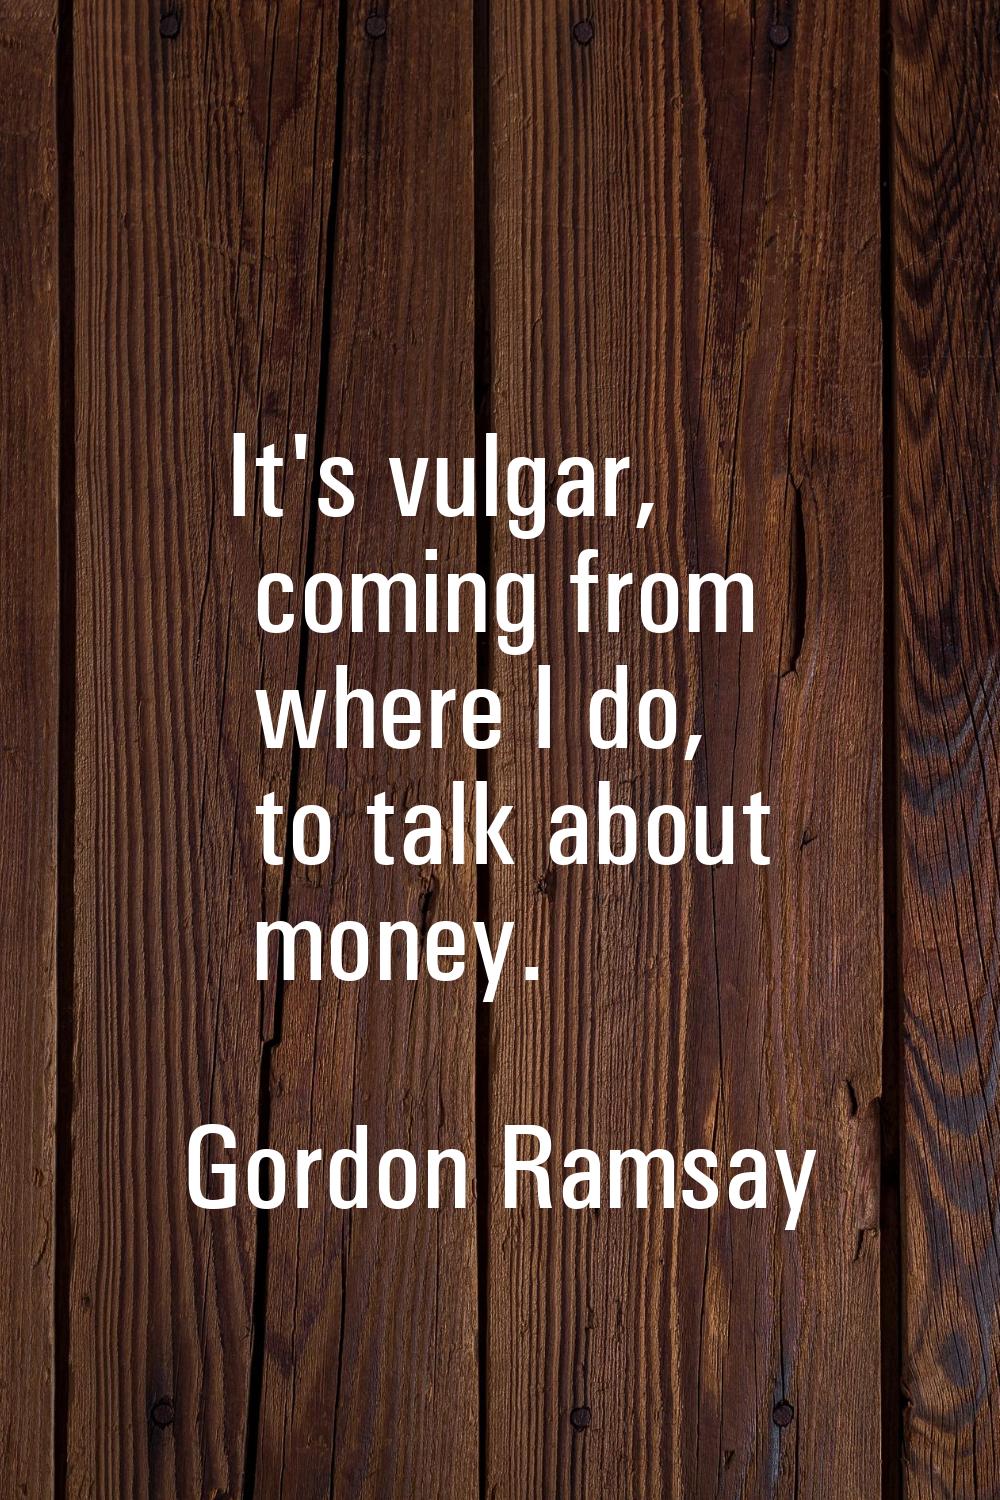 It's vulgar, coming from where I do, to talk about money.